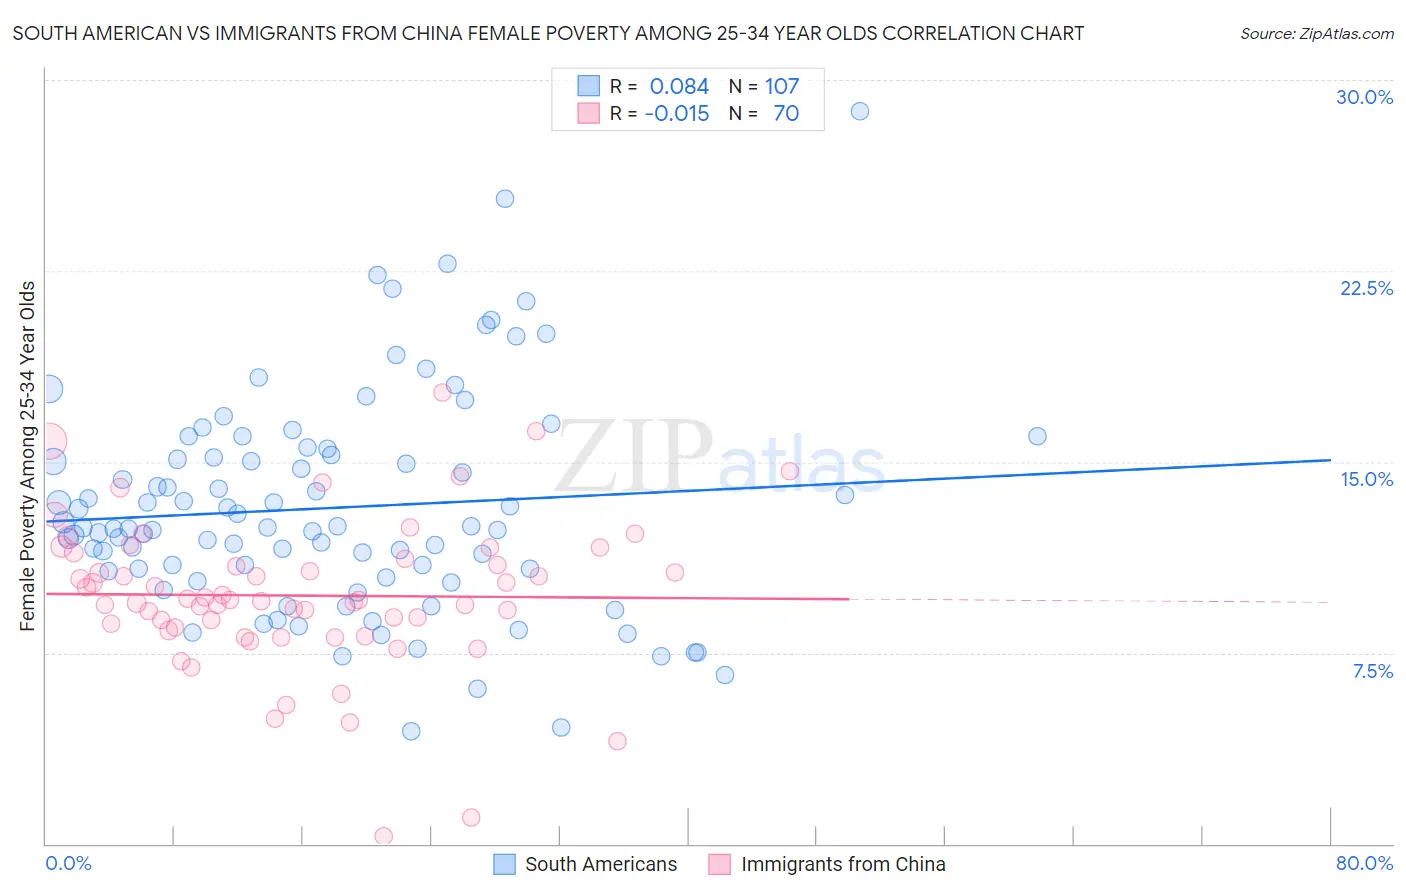 South American vs Immigrants from China Female Poverty Among 25-34 Year Olds